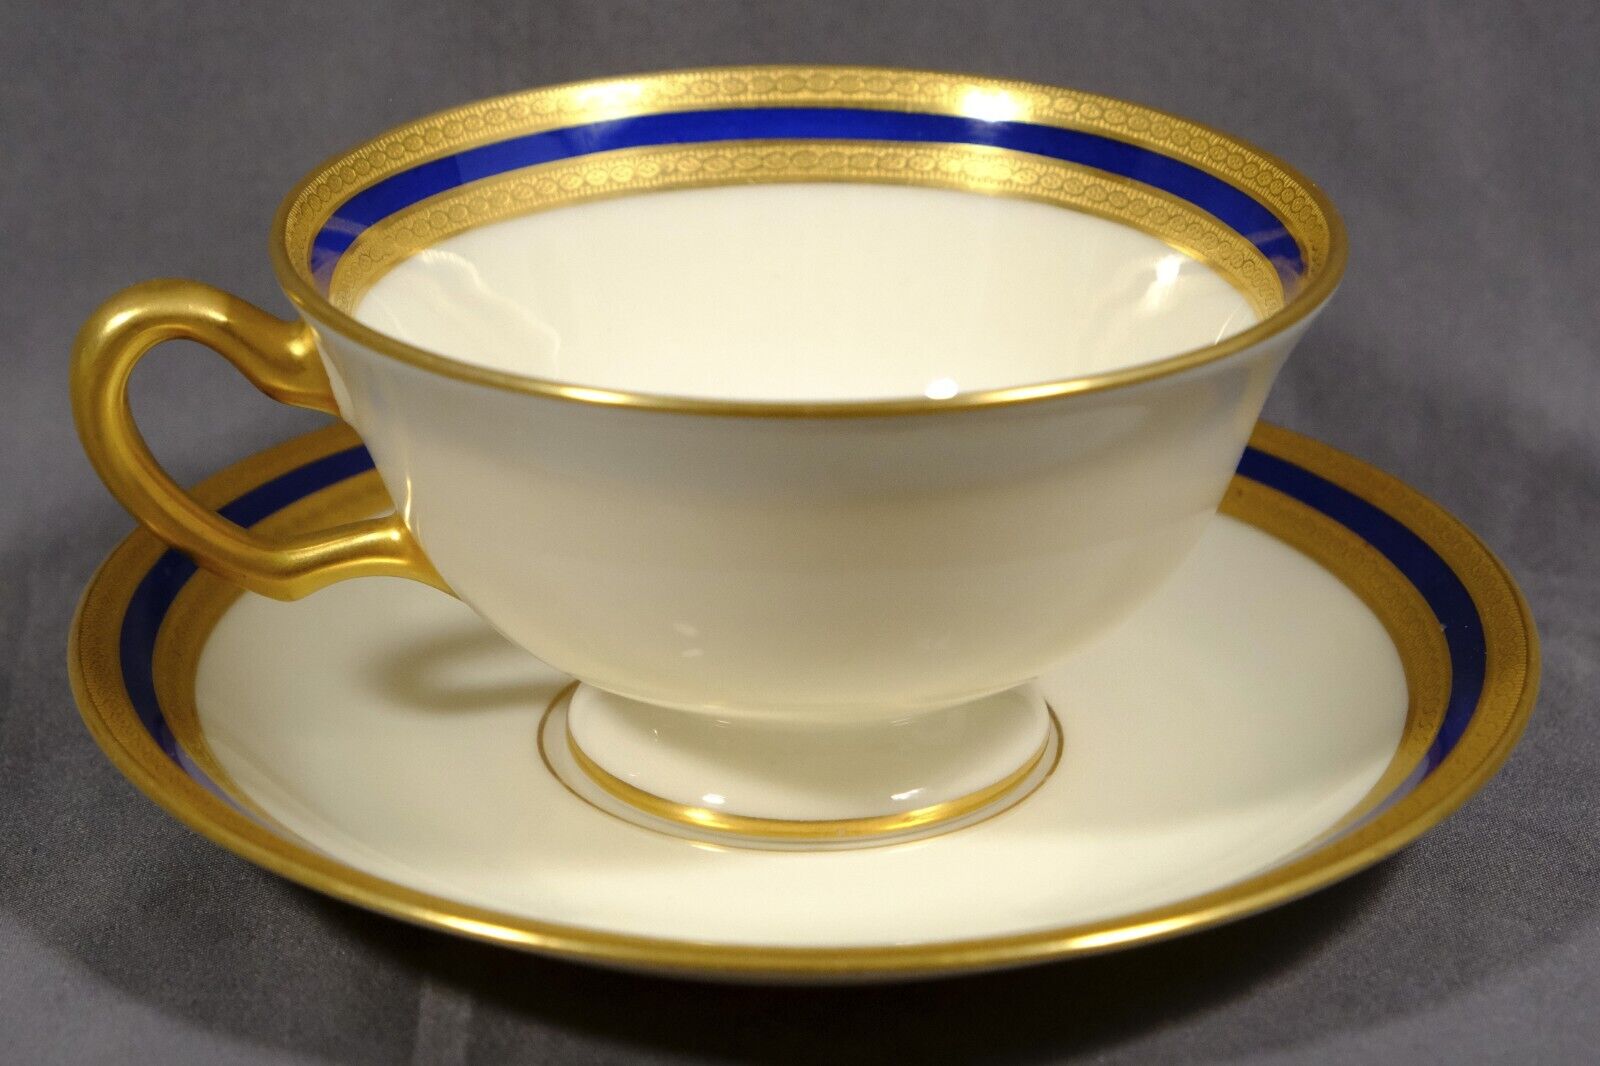 Tiffany & Co. Lenox P72 Cobalt Blue and Gold Bands Cup & Saucer